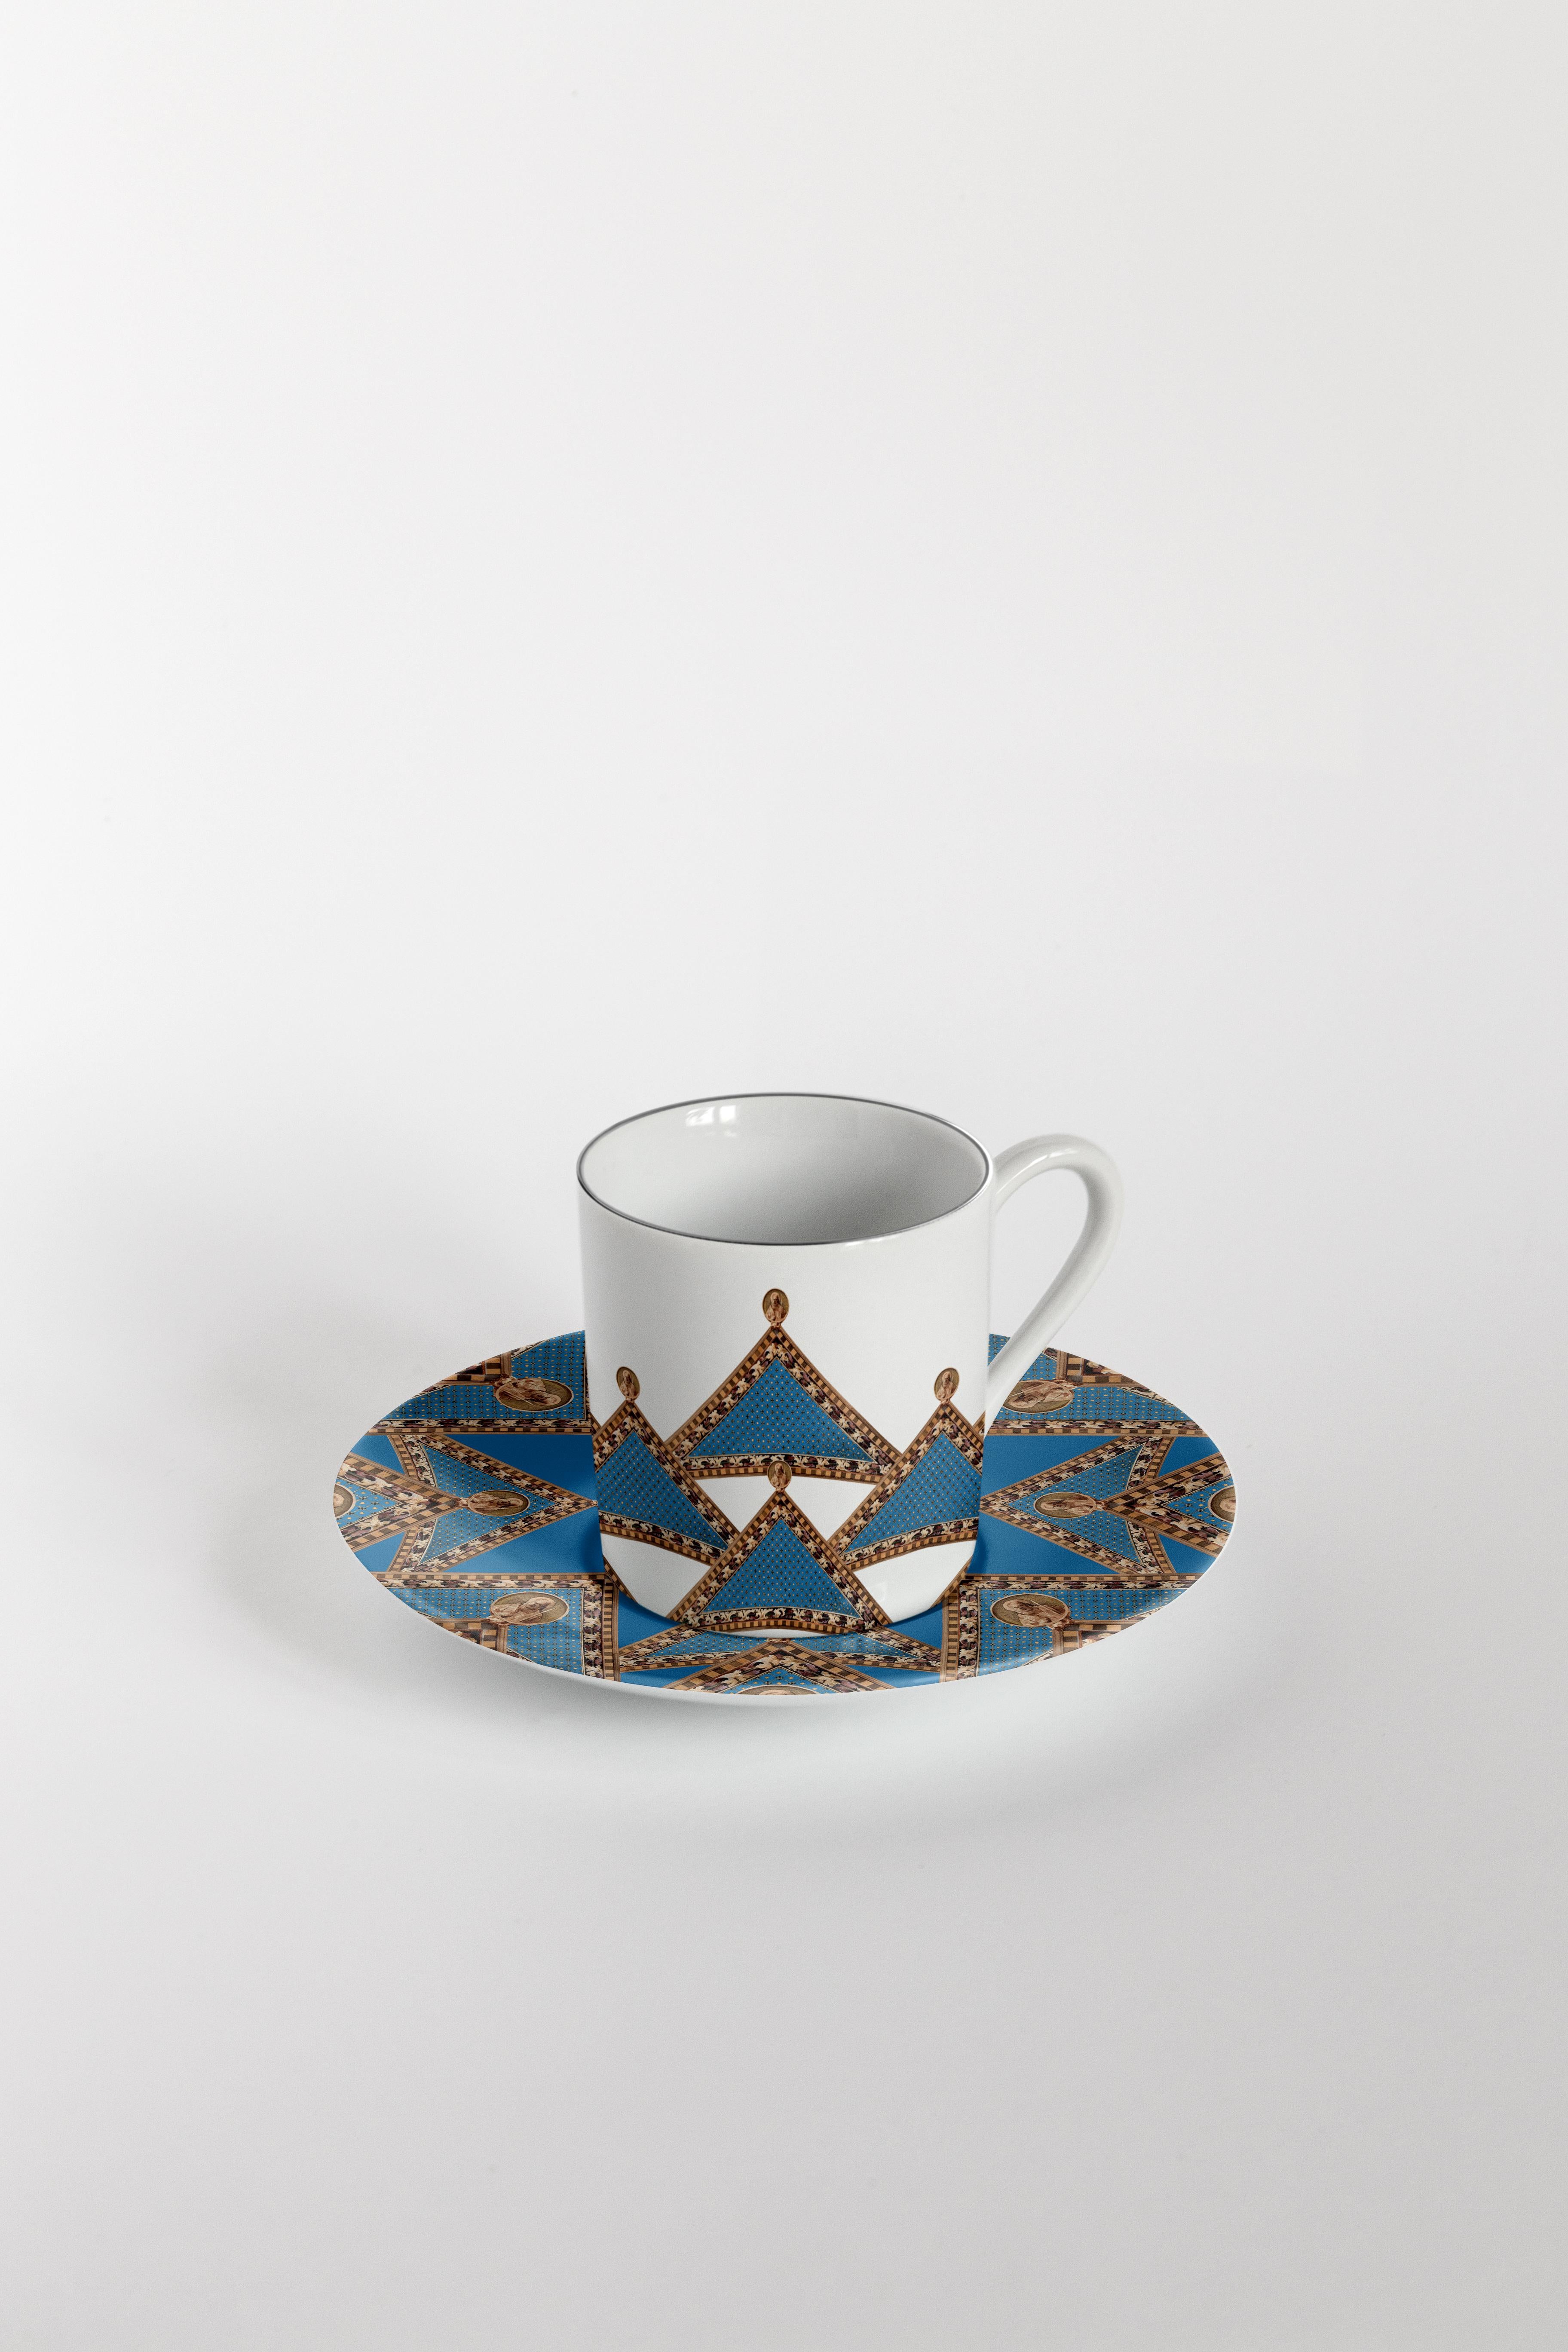 Le Volte Celesti, Six Contemporary Decorated Coffee Cups with Plates For Sale 2